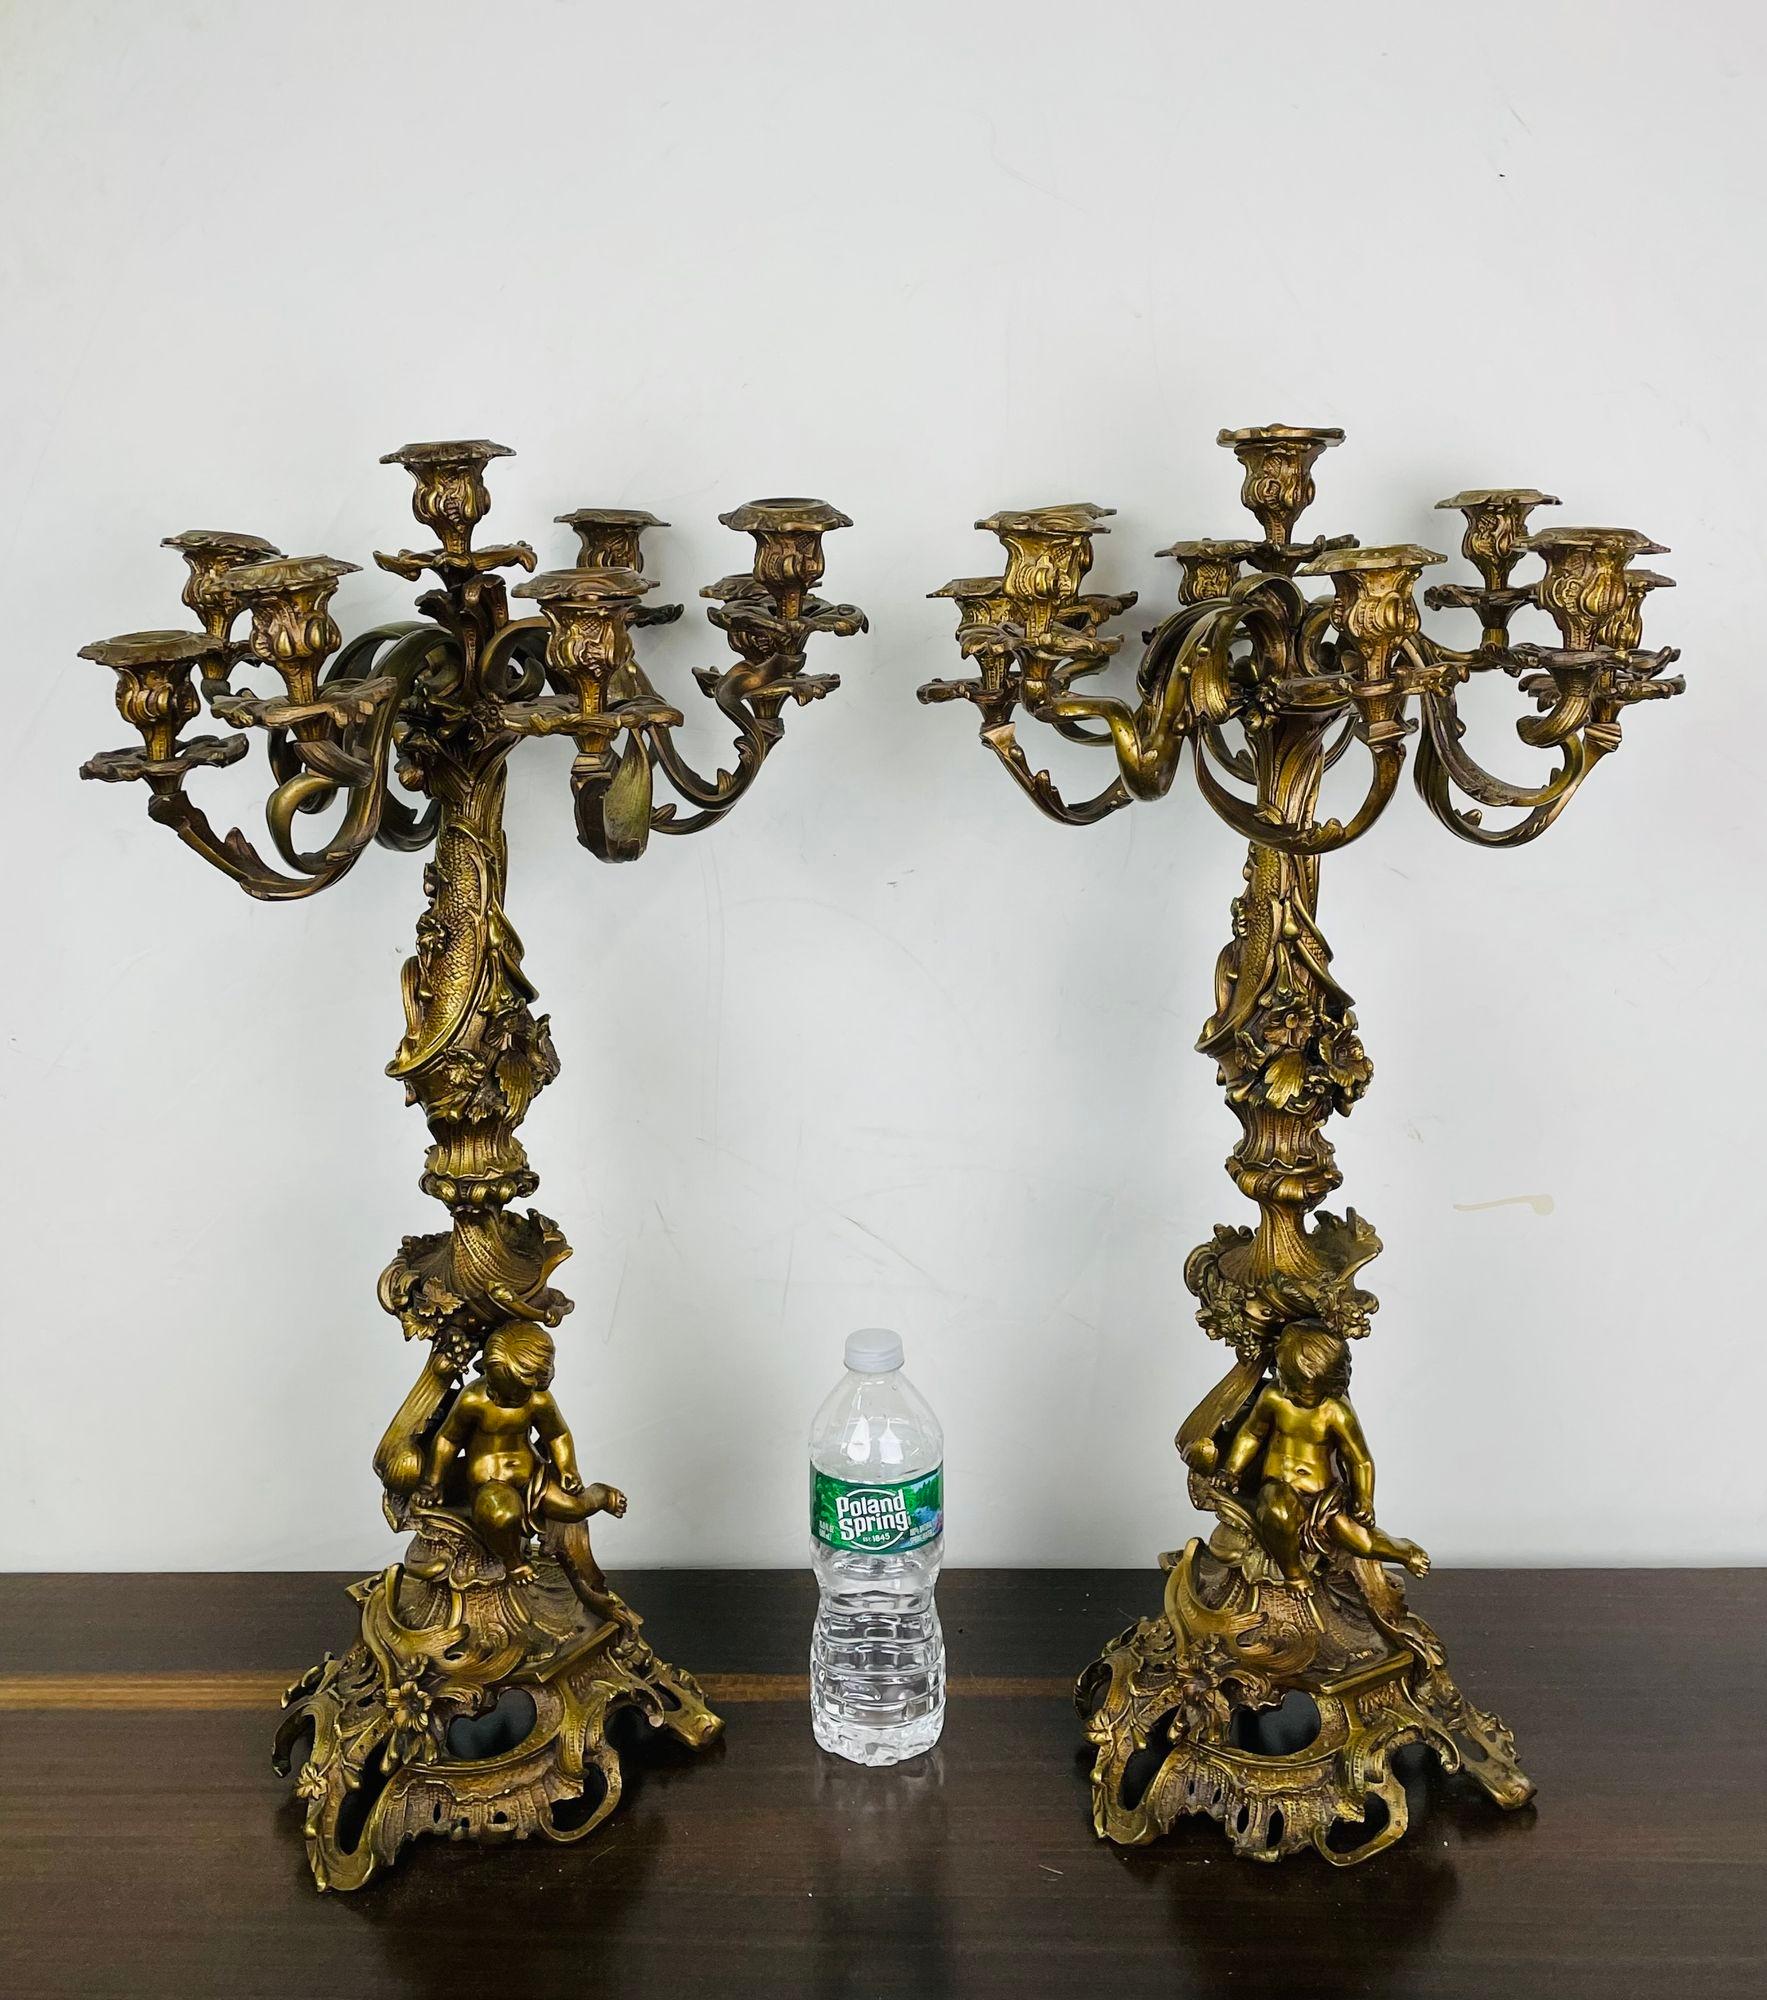 Pair of Louis XVI Style Gilt Bronze candelabra, Cherub Florentine Form
A large and impressive pair of Candelabra, each having a large group of nine arms for candlesticks on a center column form pedestal with a Cherub holding the stem. The pair on